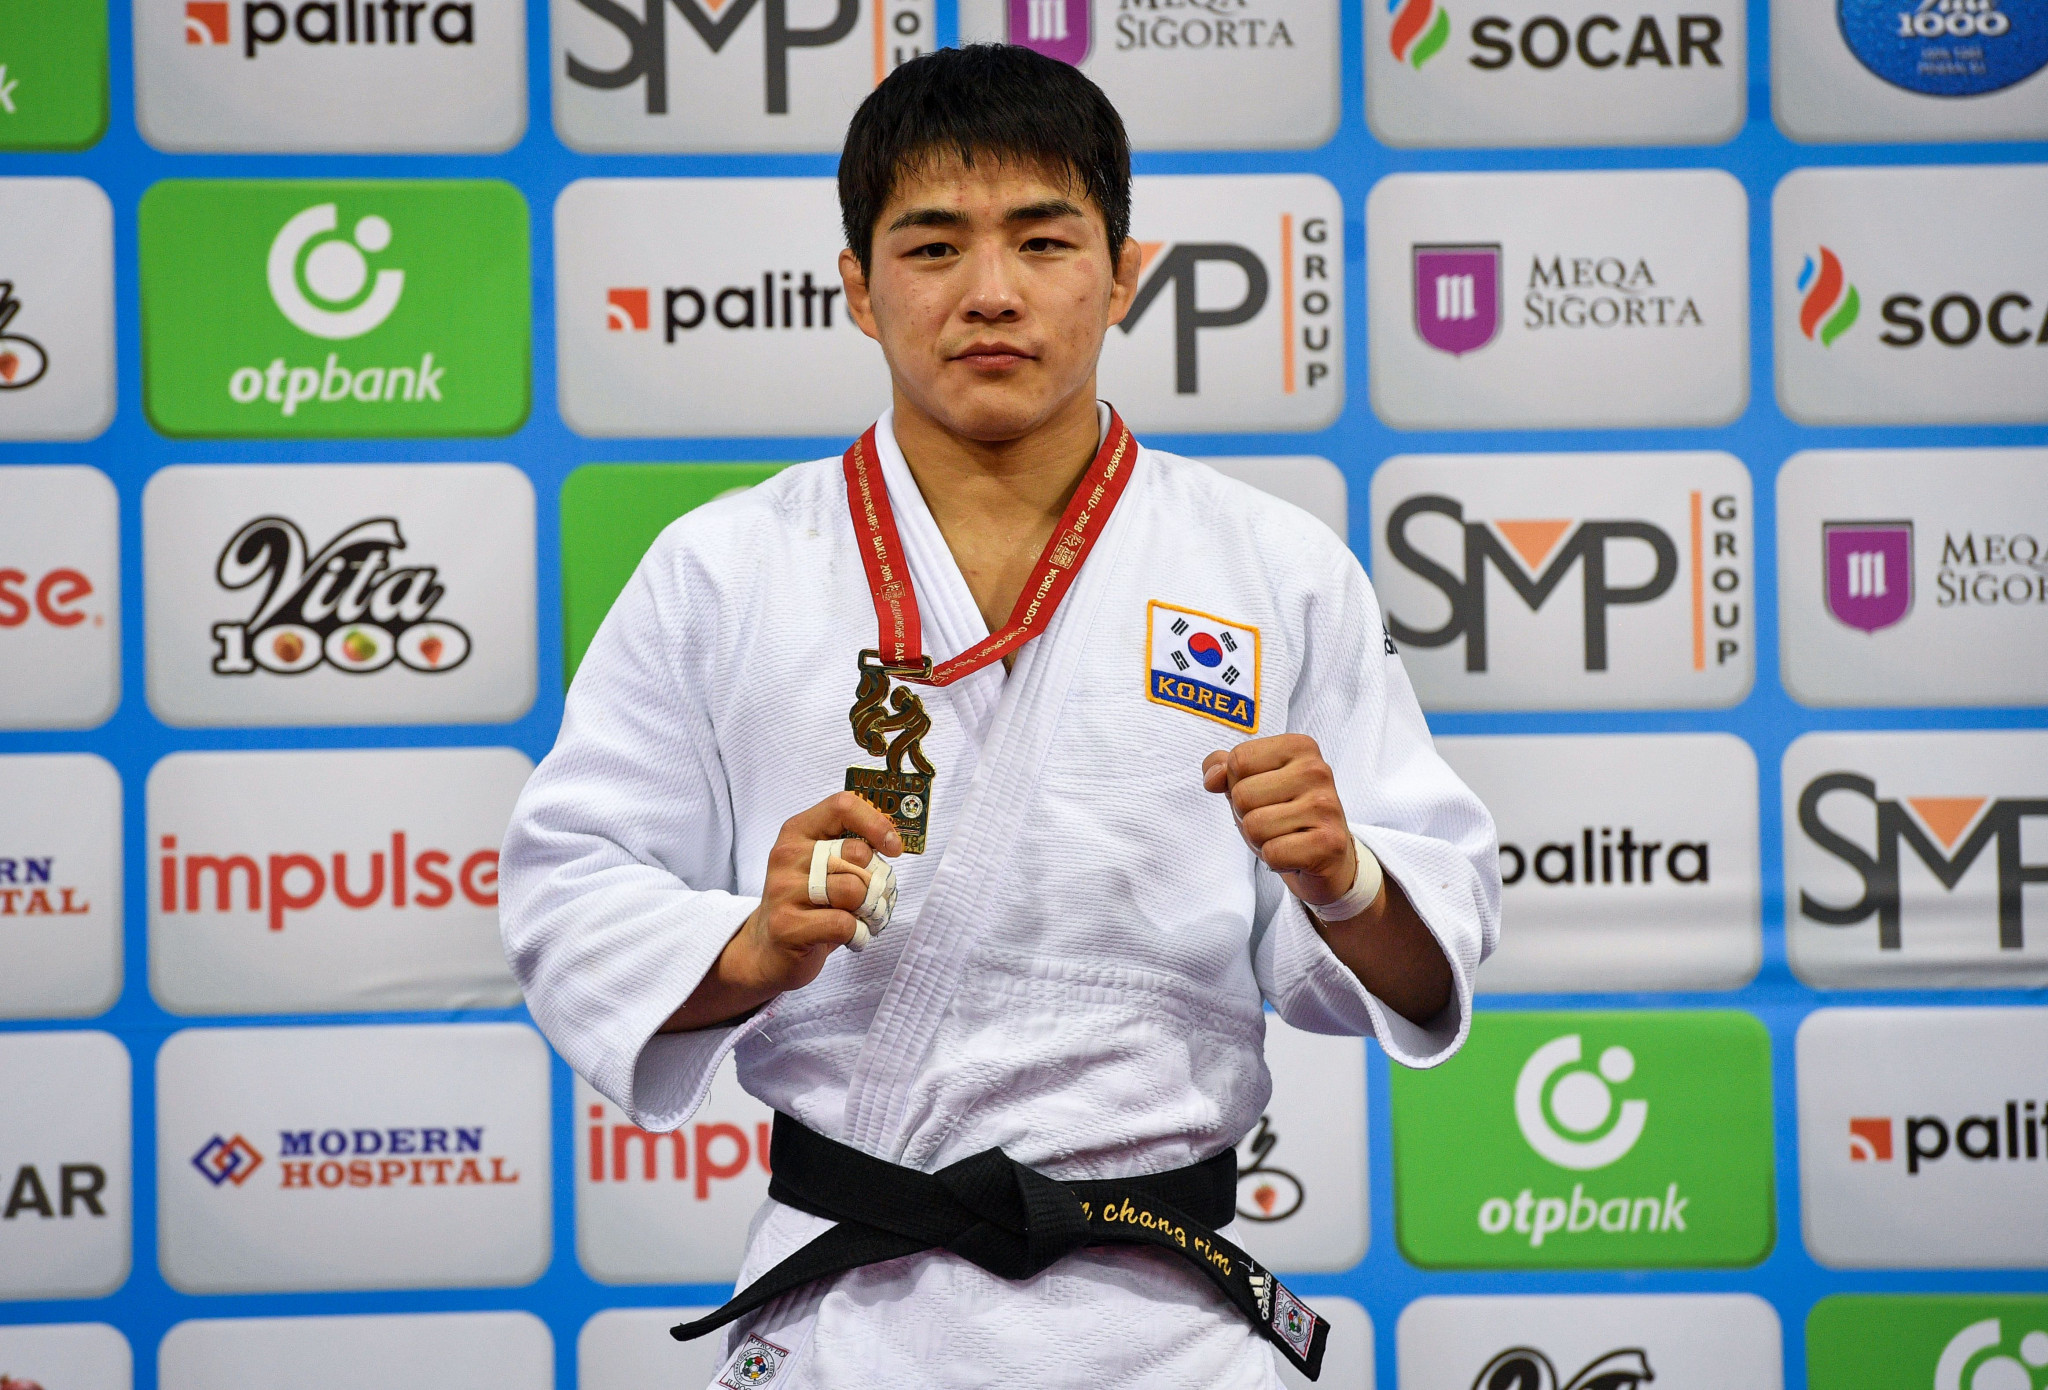 Defending champions shocked on third day of IJF World Championships